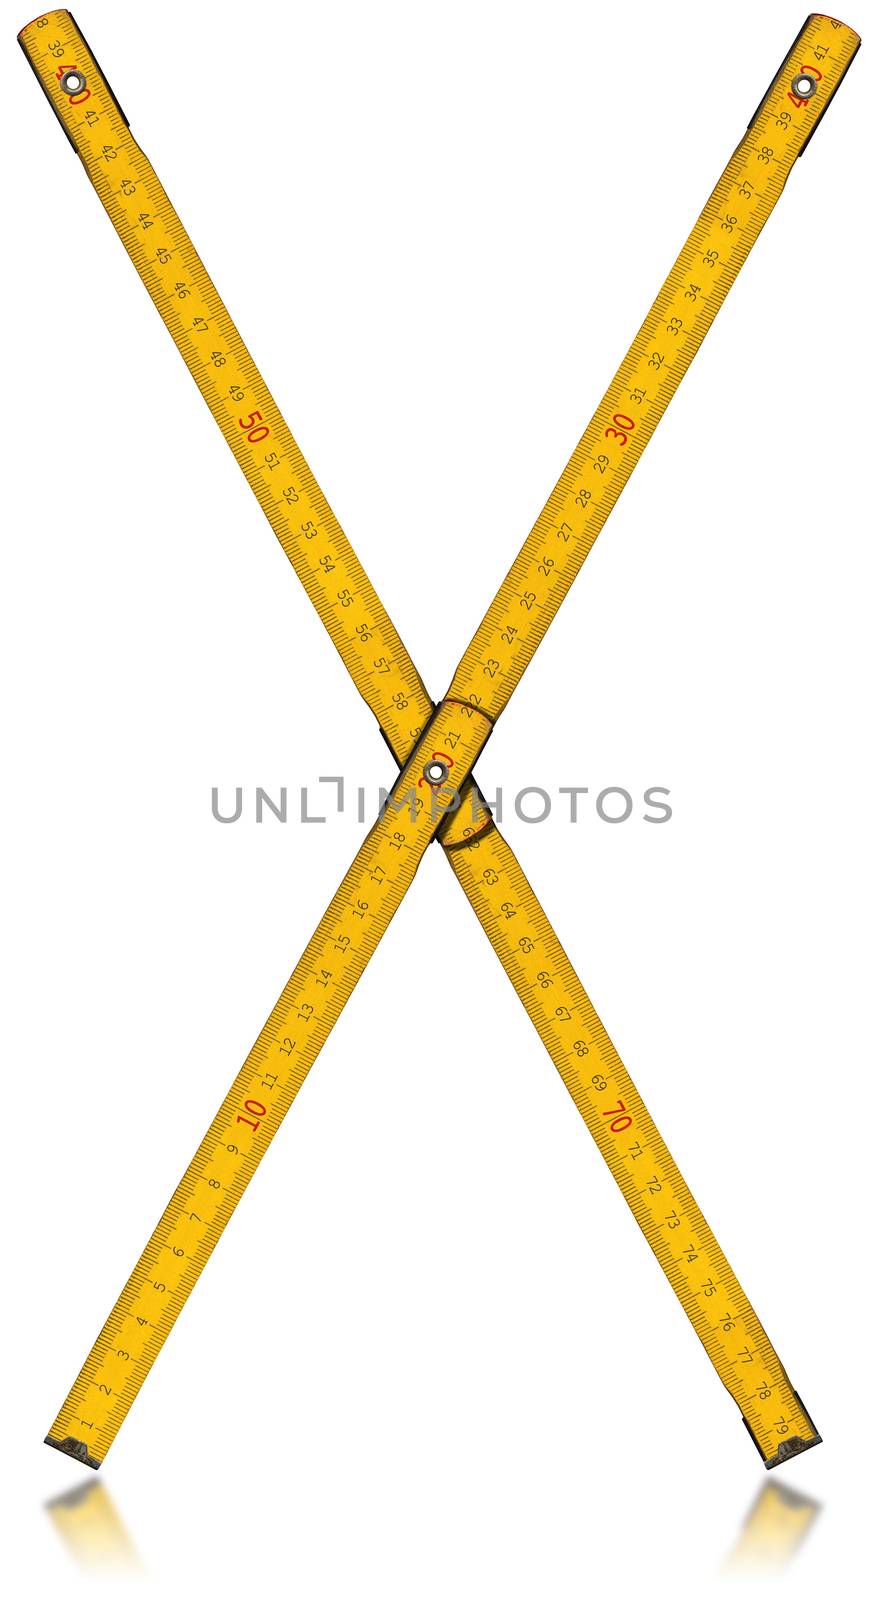 Font X - Old Yellow Meter Ruler by catalby